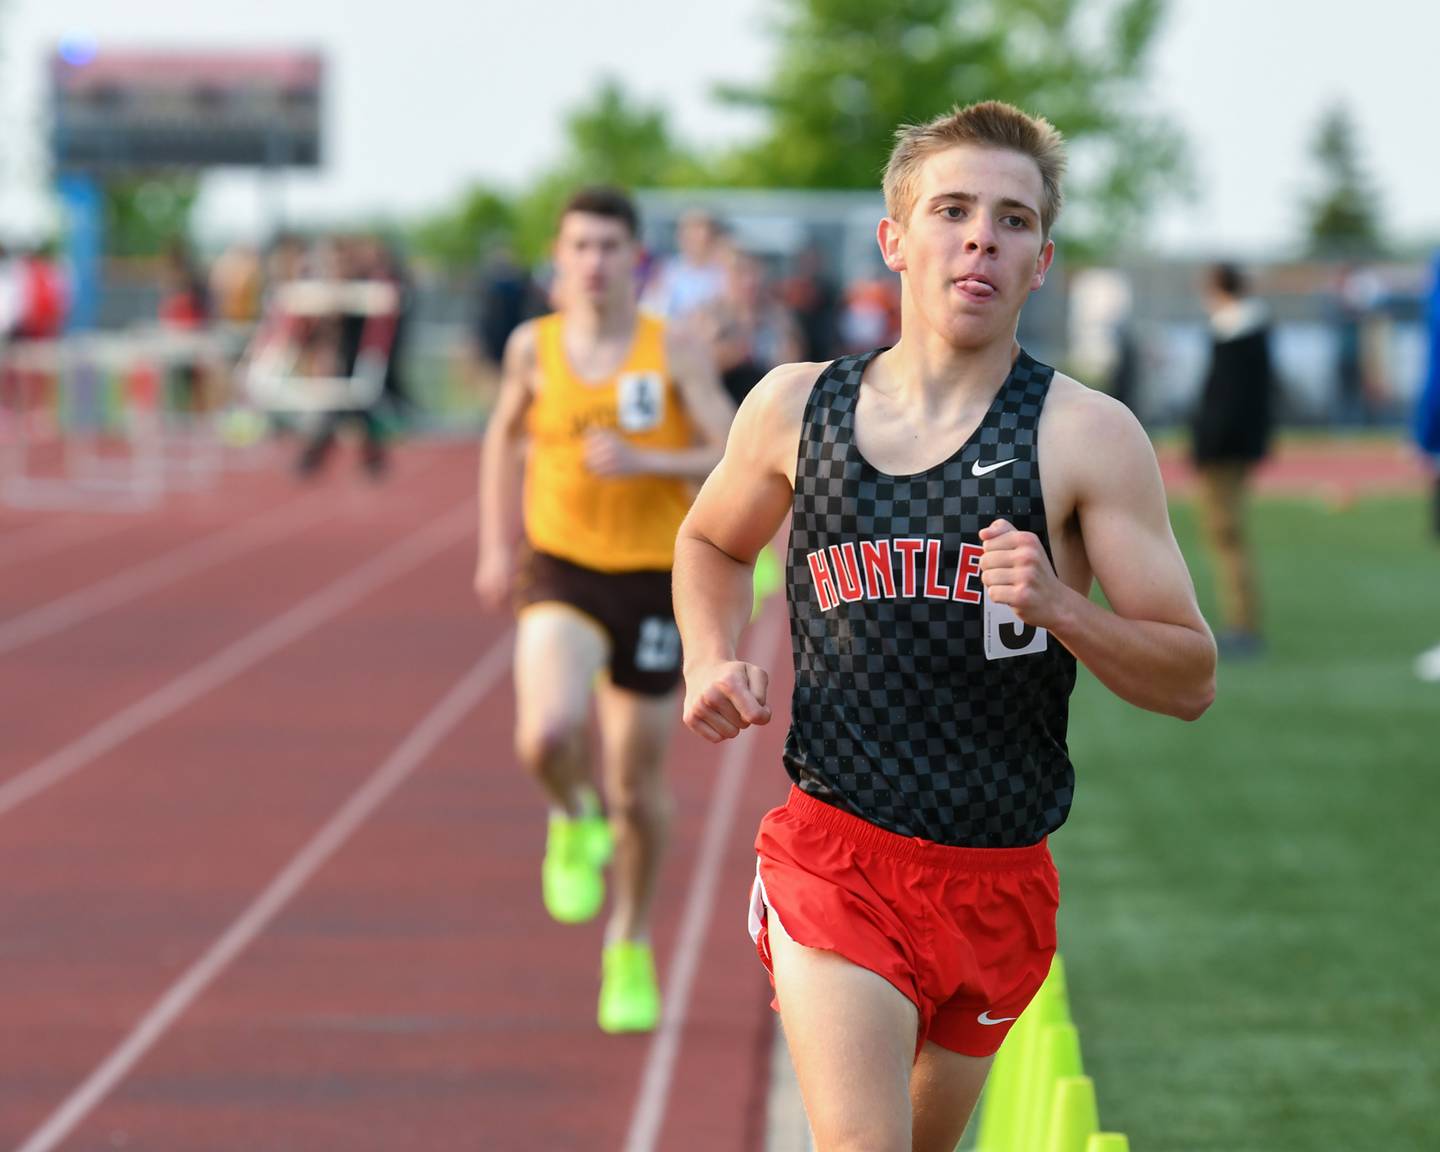 Tommy Nitz of Huntley competes in the 3200 meter run on Thursday May 17th where he raun a 9:23.98 during the sectional meet held at DeKalb High School.